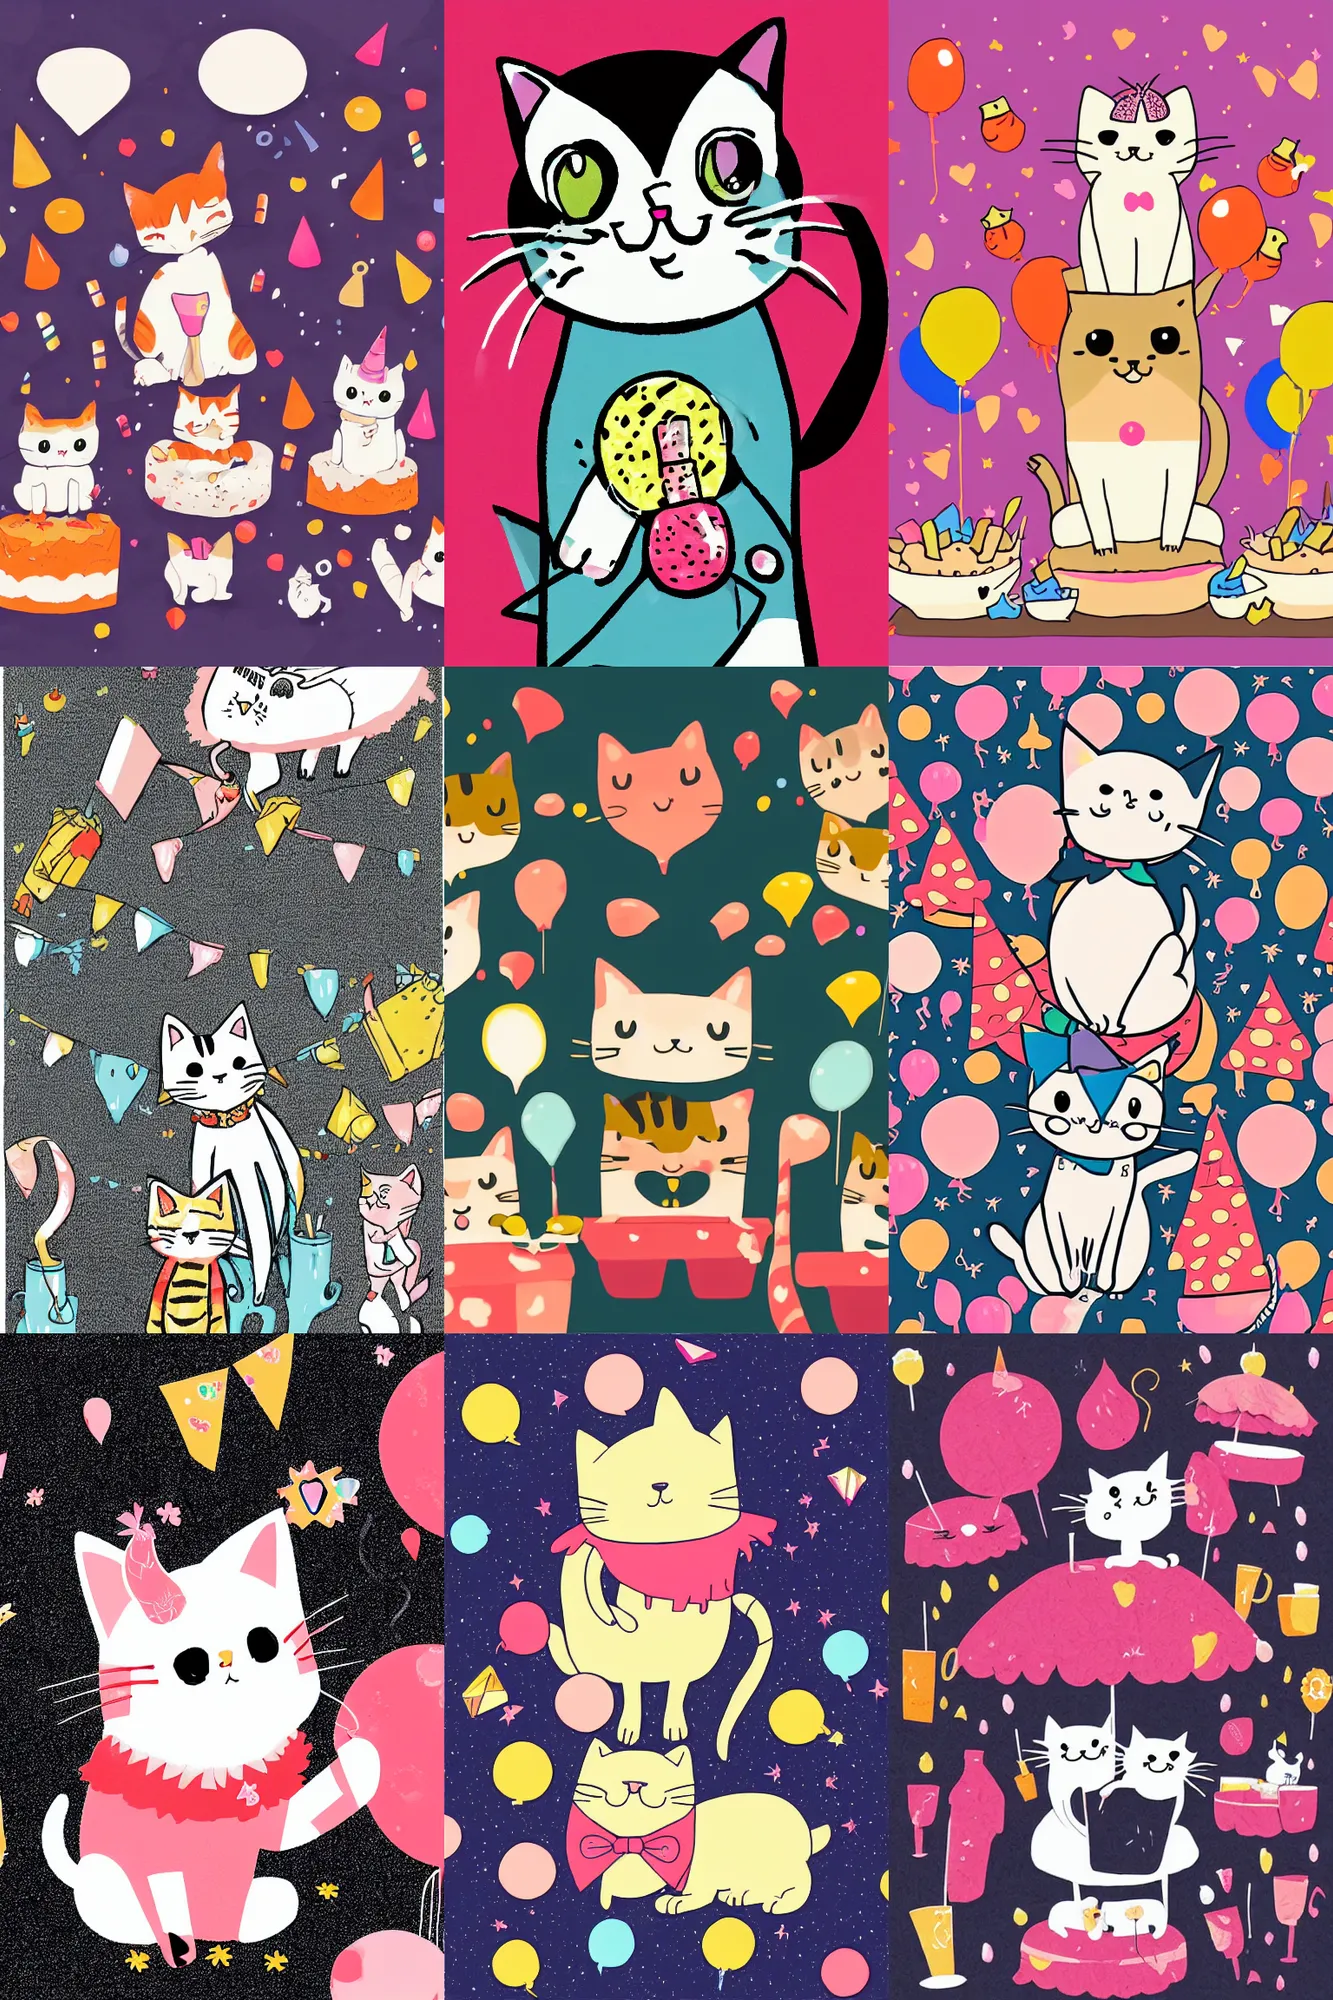 Prompt: Kawaii illustration of a cat having a party